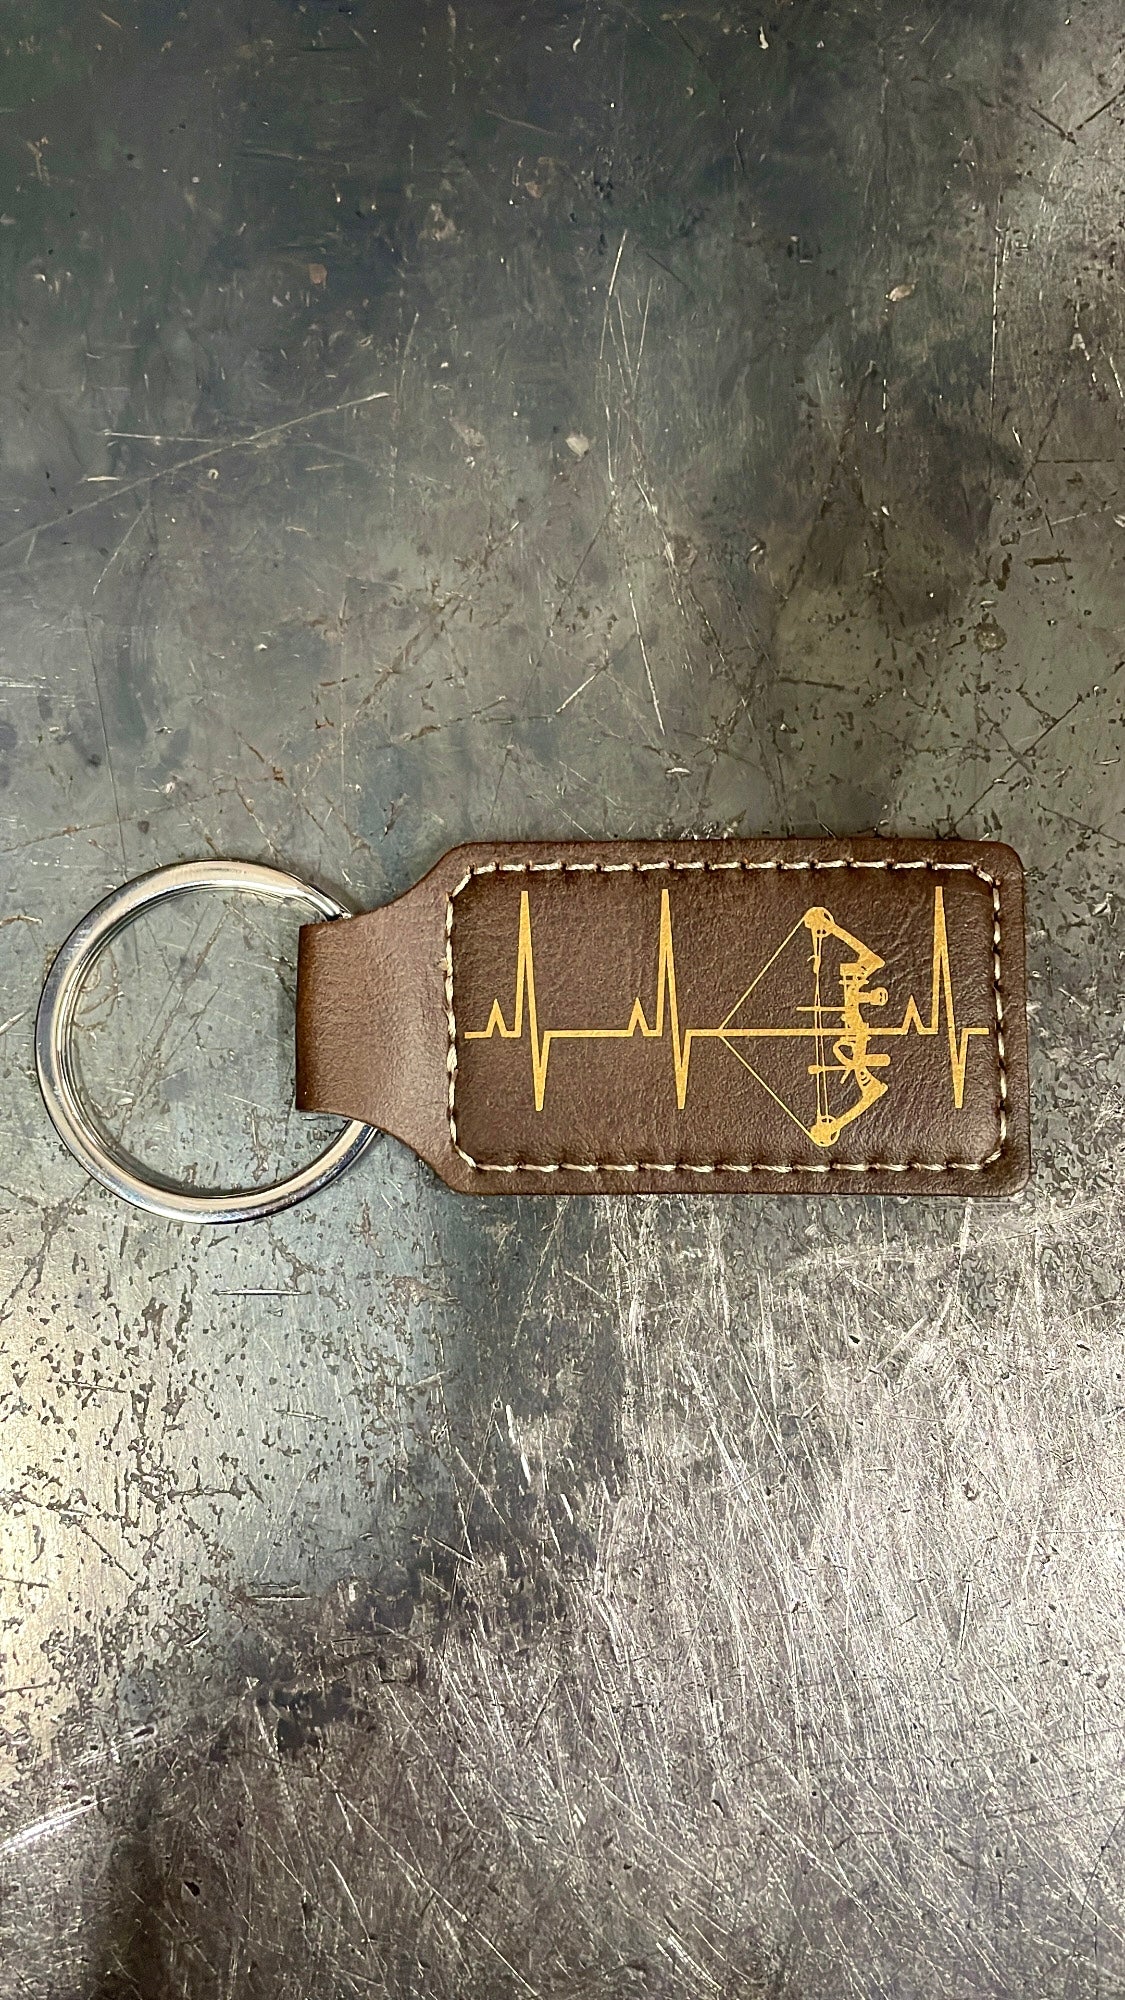 American Tradition, Leather Style Engraved Keyring